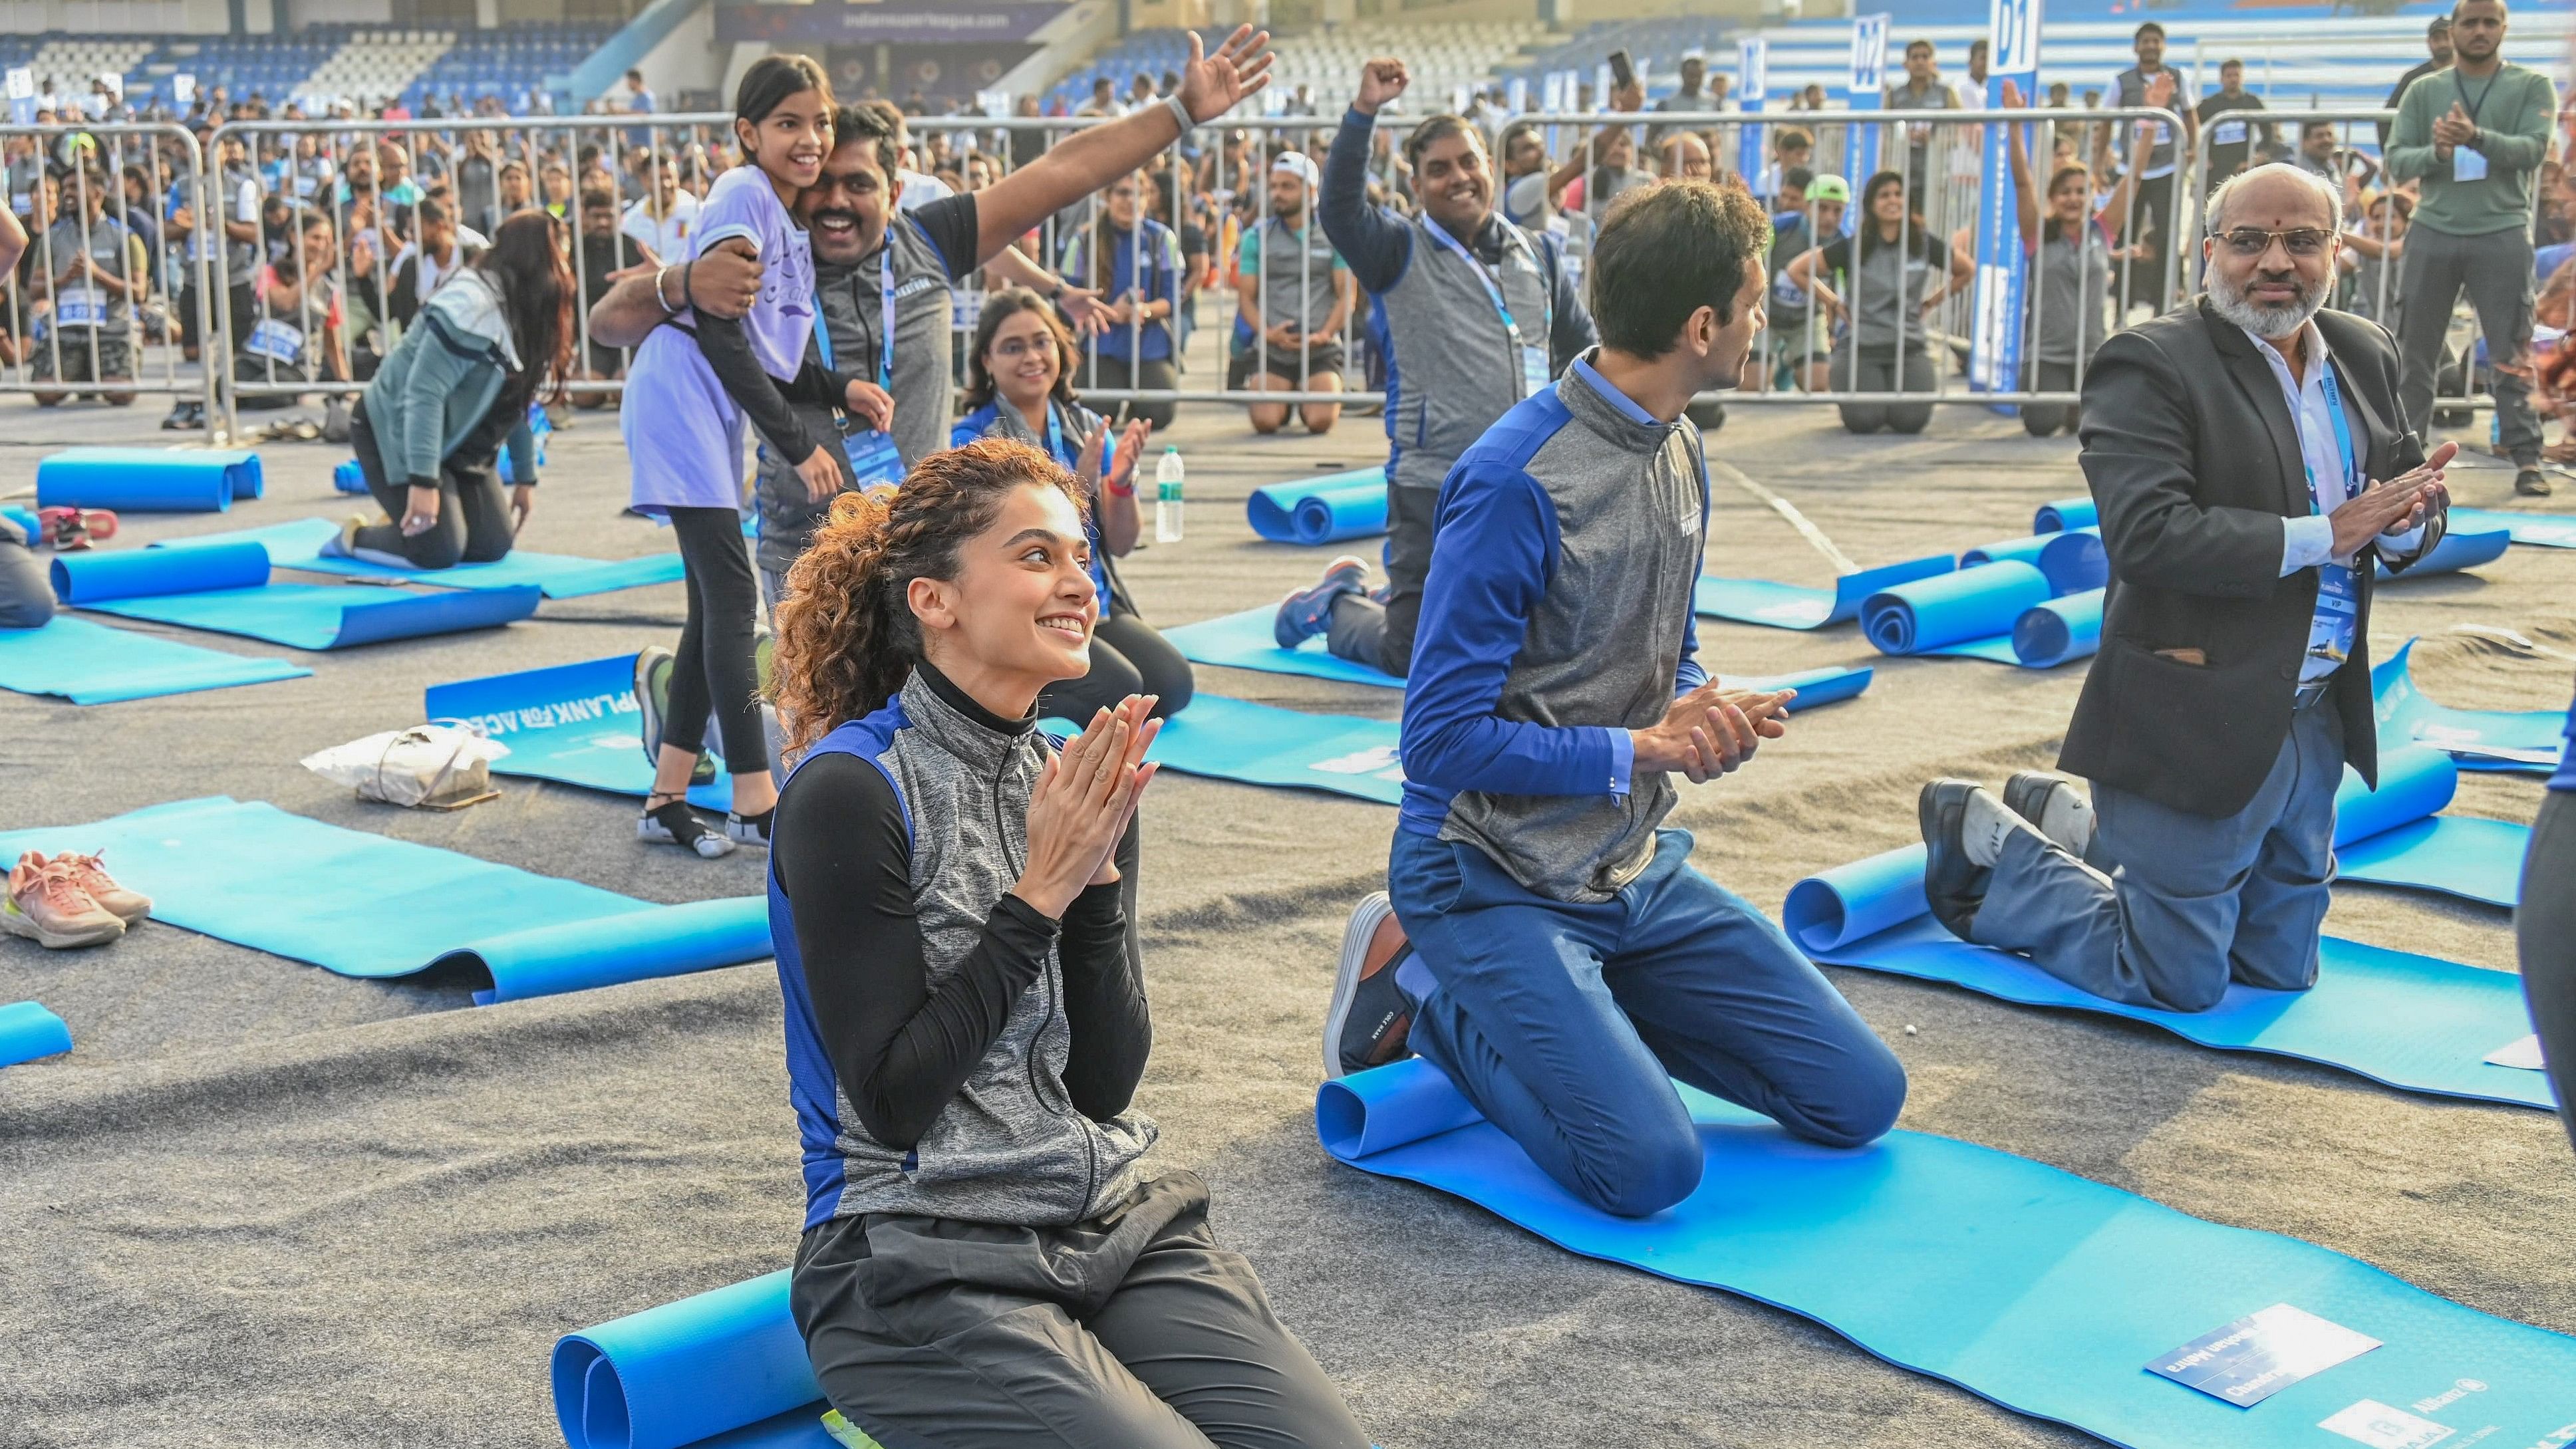 <div class="paragraphs"><p>Taapsee Pannu participated in the fourth edition of Plankathon saluting the Indian Space Research Organisation (ISRO)’s outstanding achievements organised by Bajaj Allanz Life Insurance at Sree Kanteerava Stadium in Bengaluru on Sunday, 11th February 2024. Chandramohan Mehra, Chief Marketing Officer, Bajaj Allanz Life Insurance and Sudheer Kumar, Director, ISRO also participated in the event. </p></div>